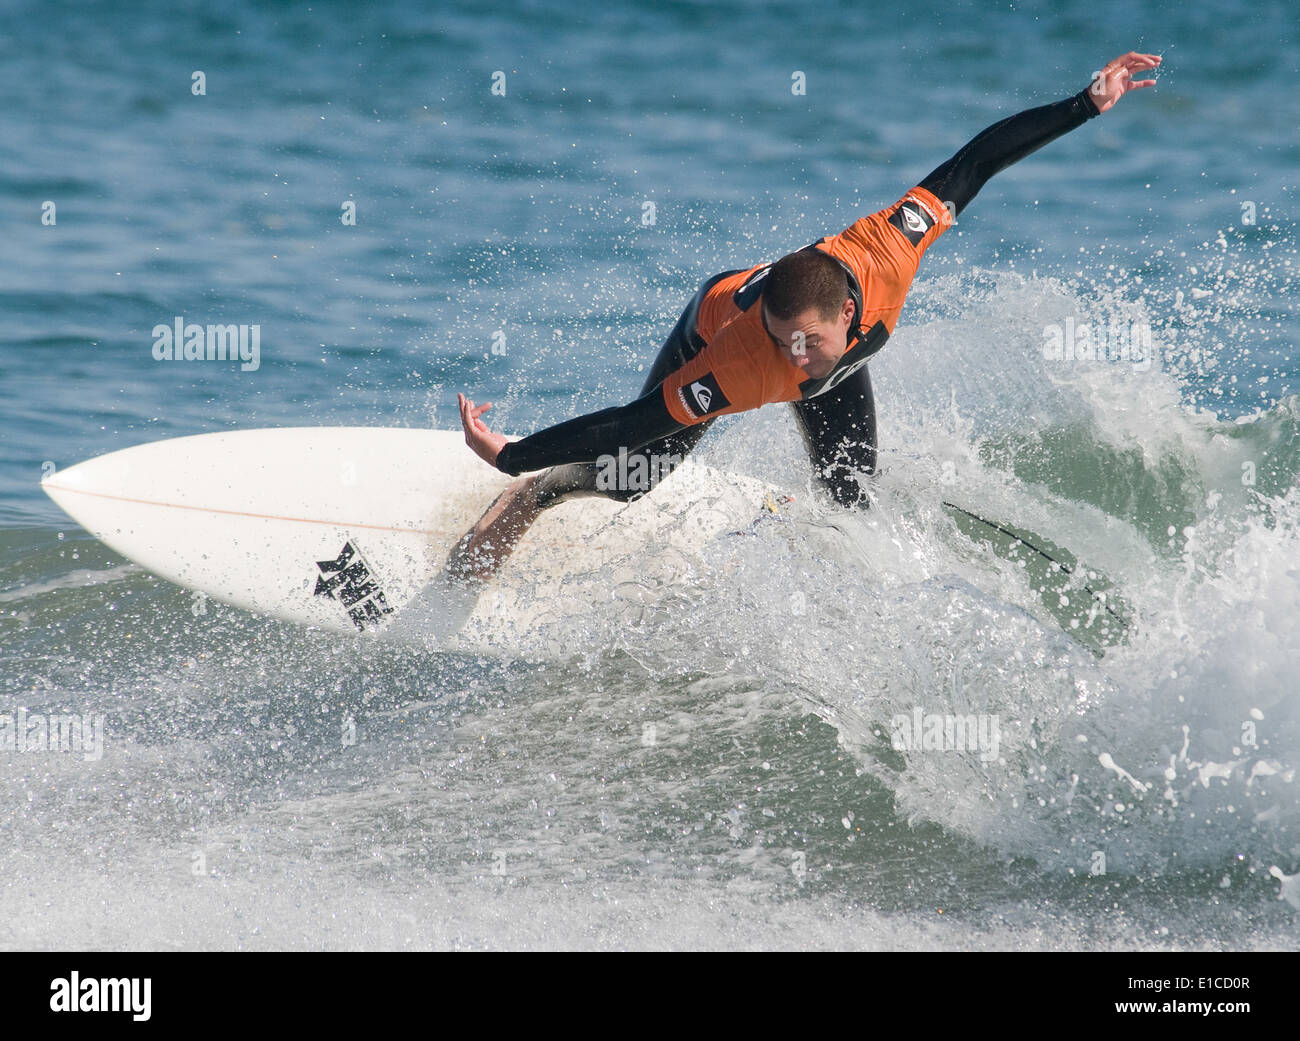 U.S. Navy Machinery Technician 2nd Class Matthew Merel surfs during a preliminary heat in the military men?s division of the Po Stock Photo